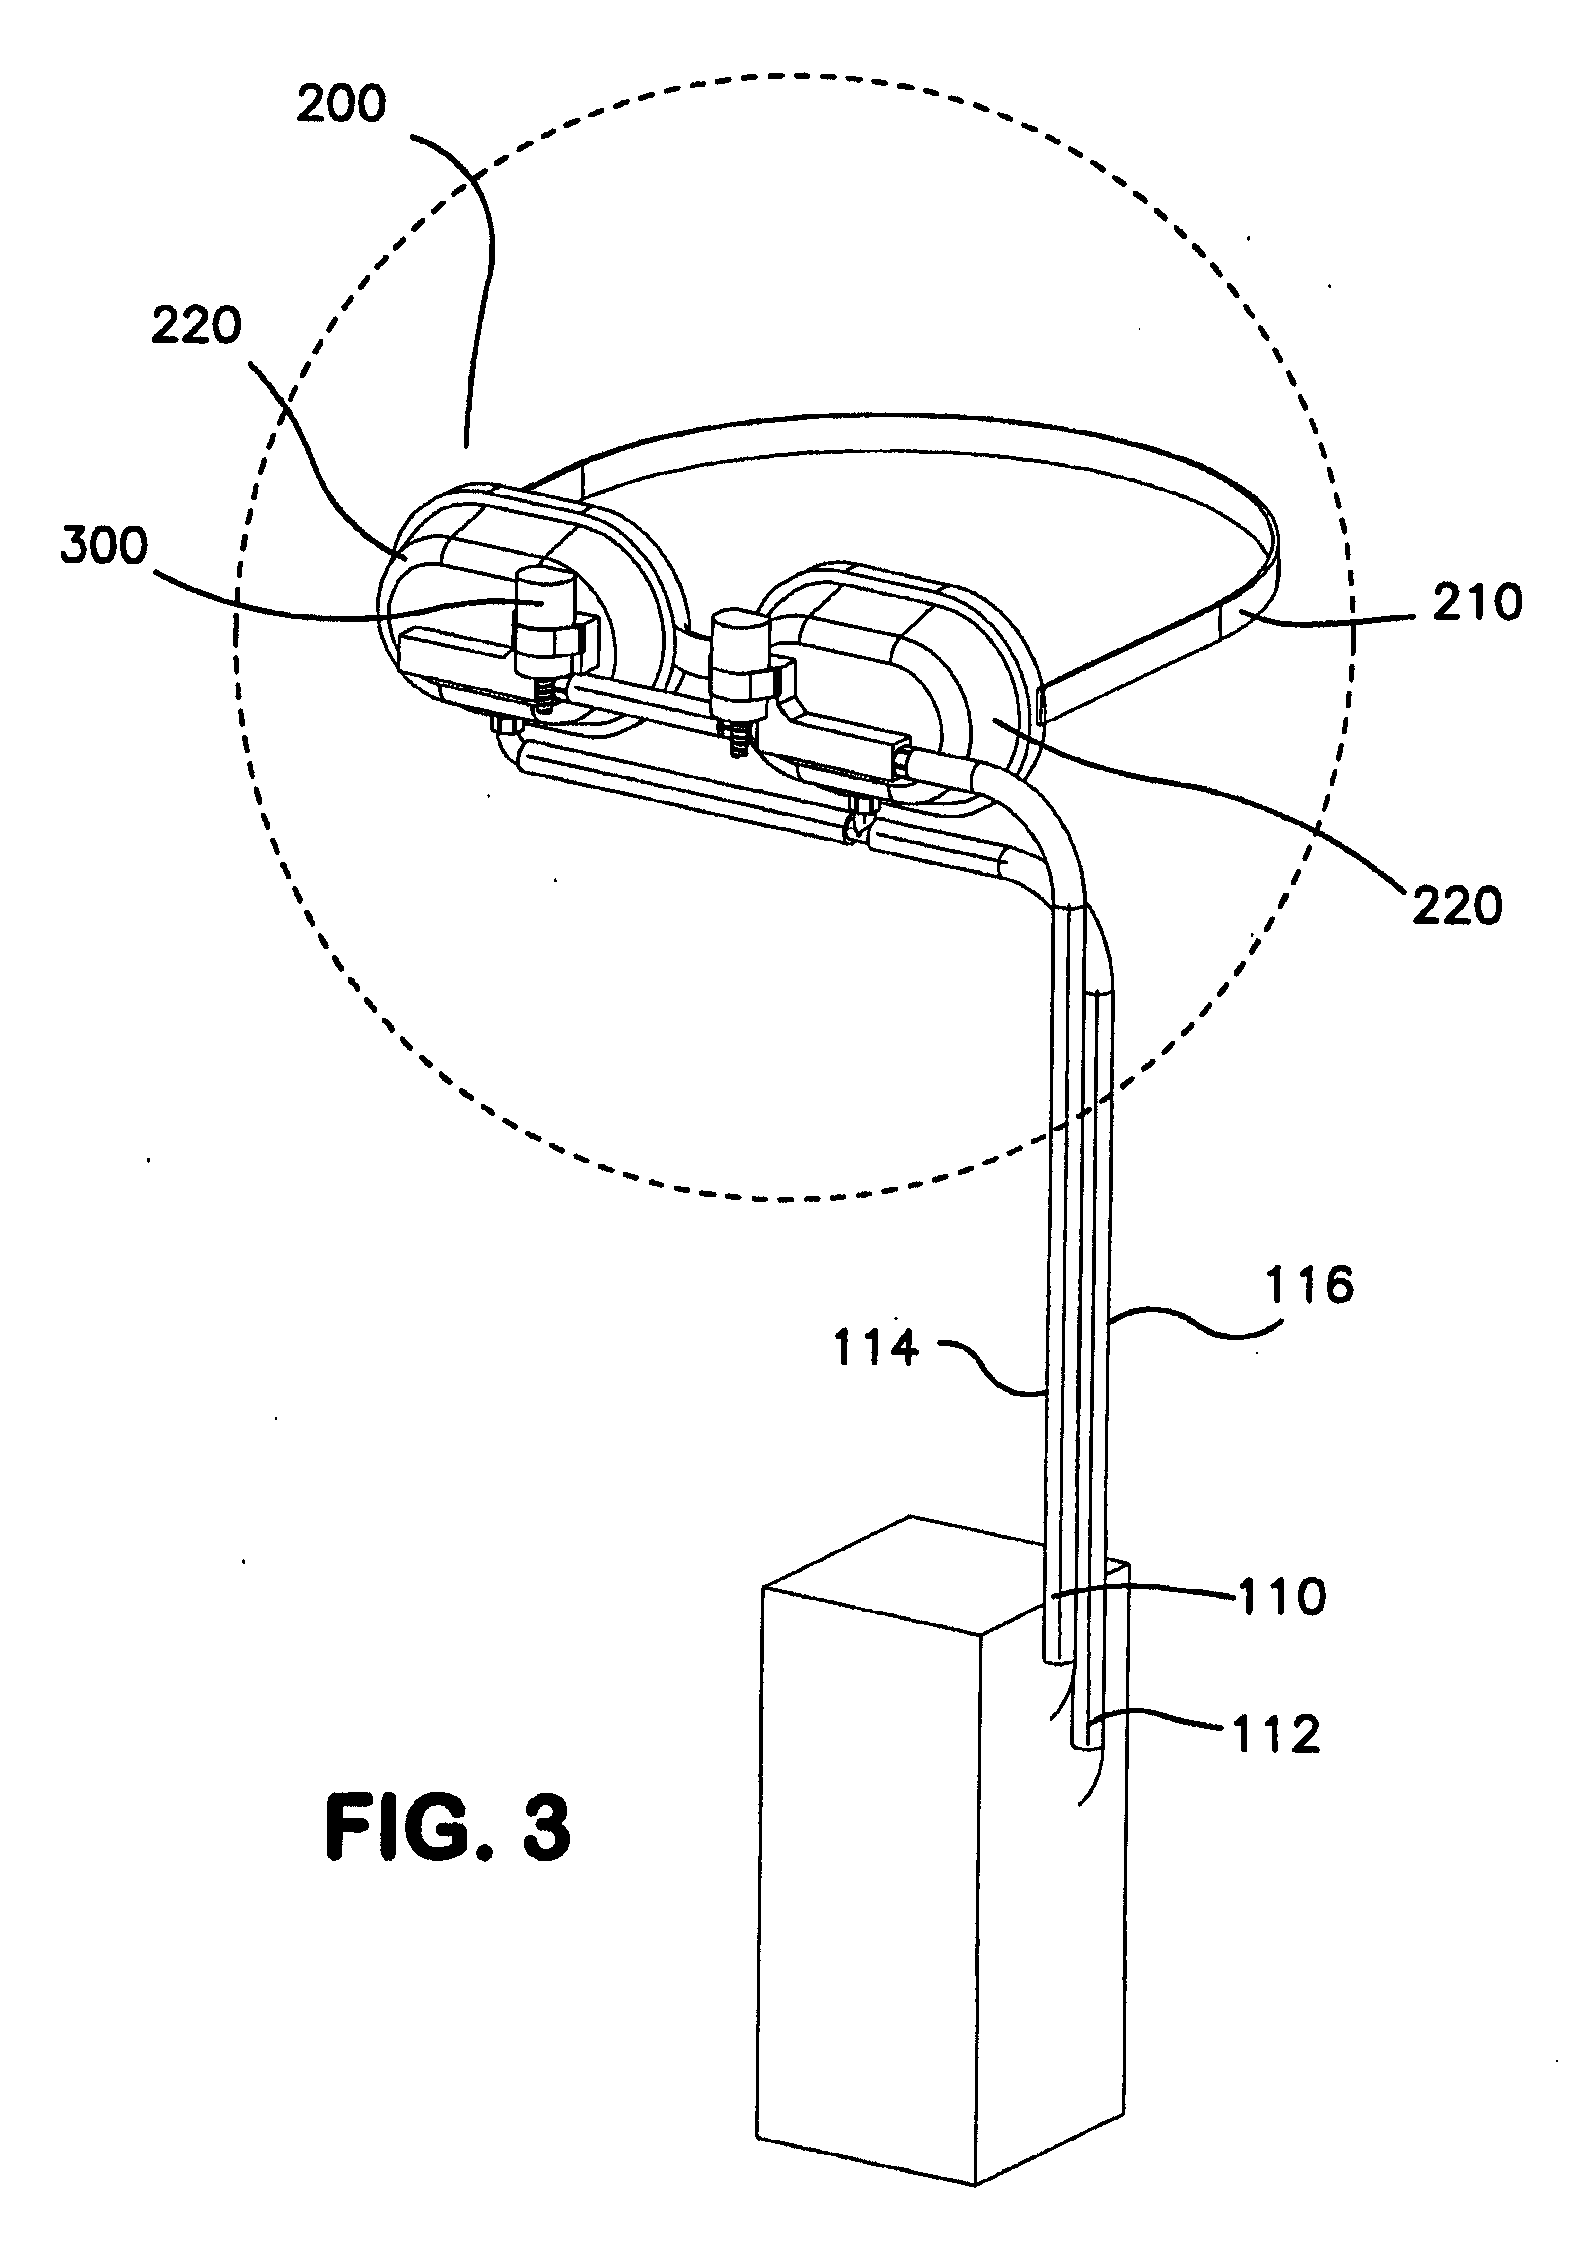 Method and apparatus for treating meibomian gland dysfunction employing fluid jet